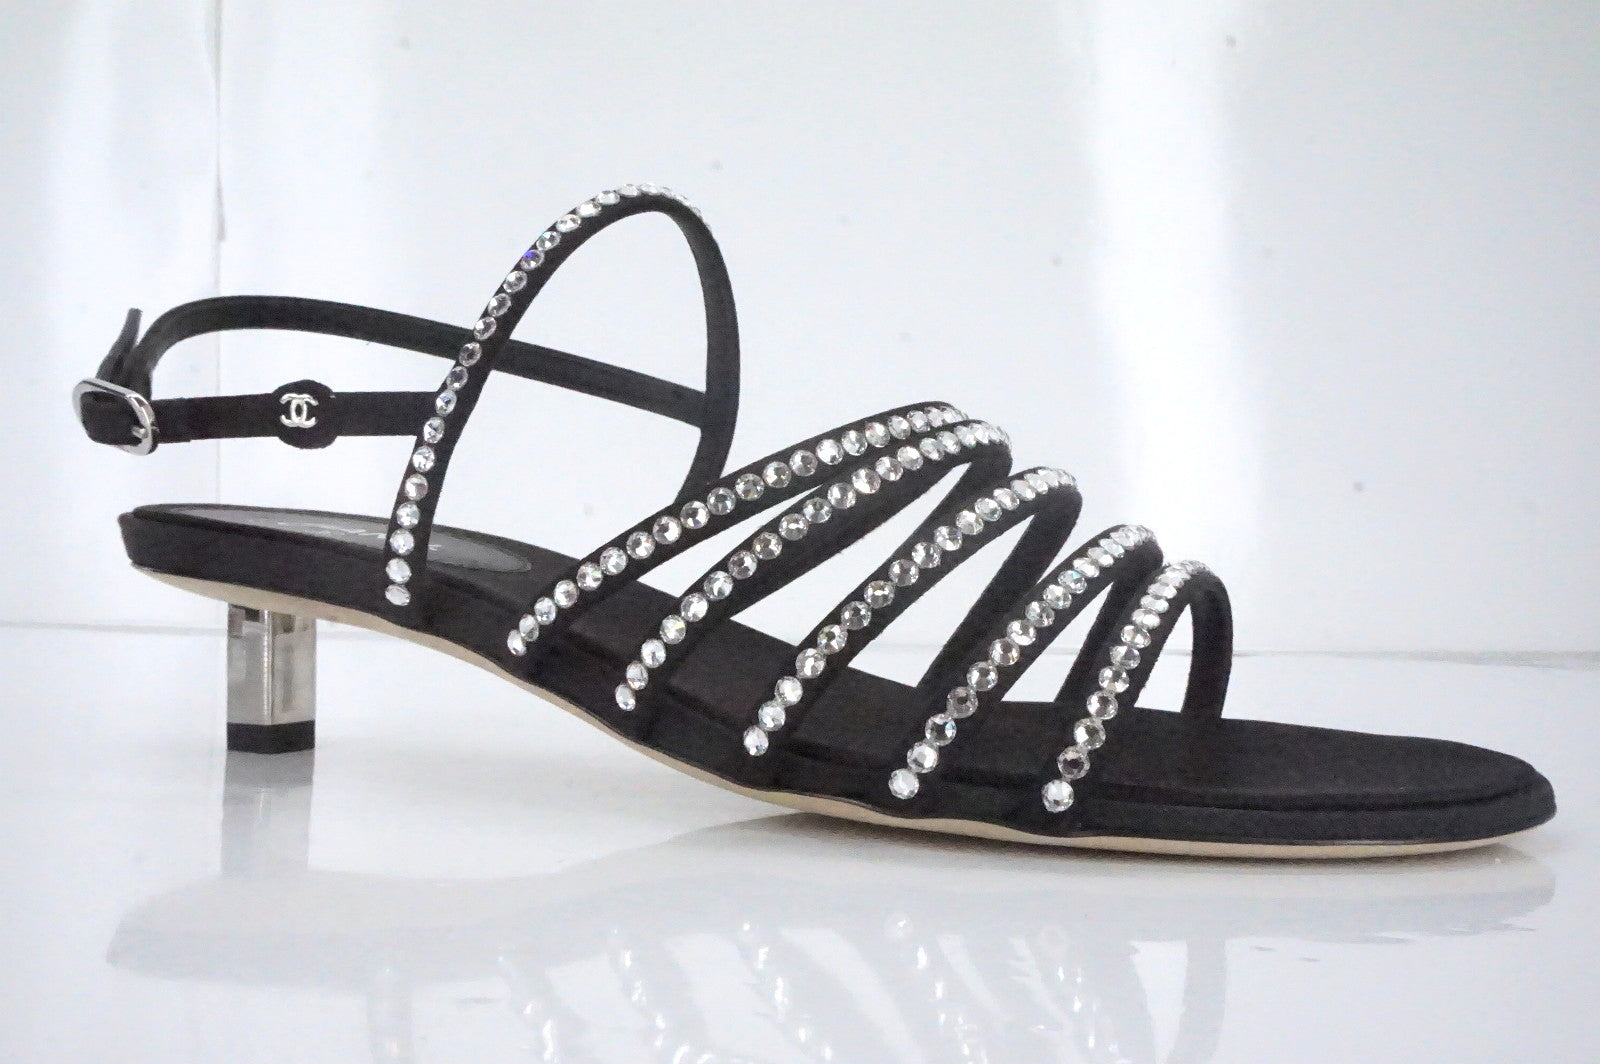 Chanel Crystal Caged Strap Kitten Heel Sandals Size 38 Logo New CC $1075